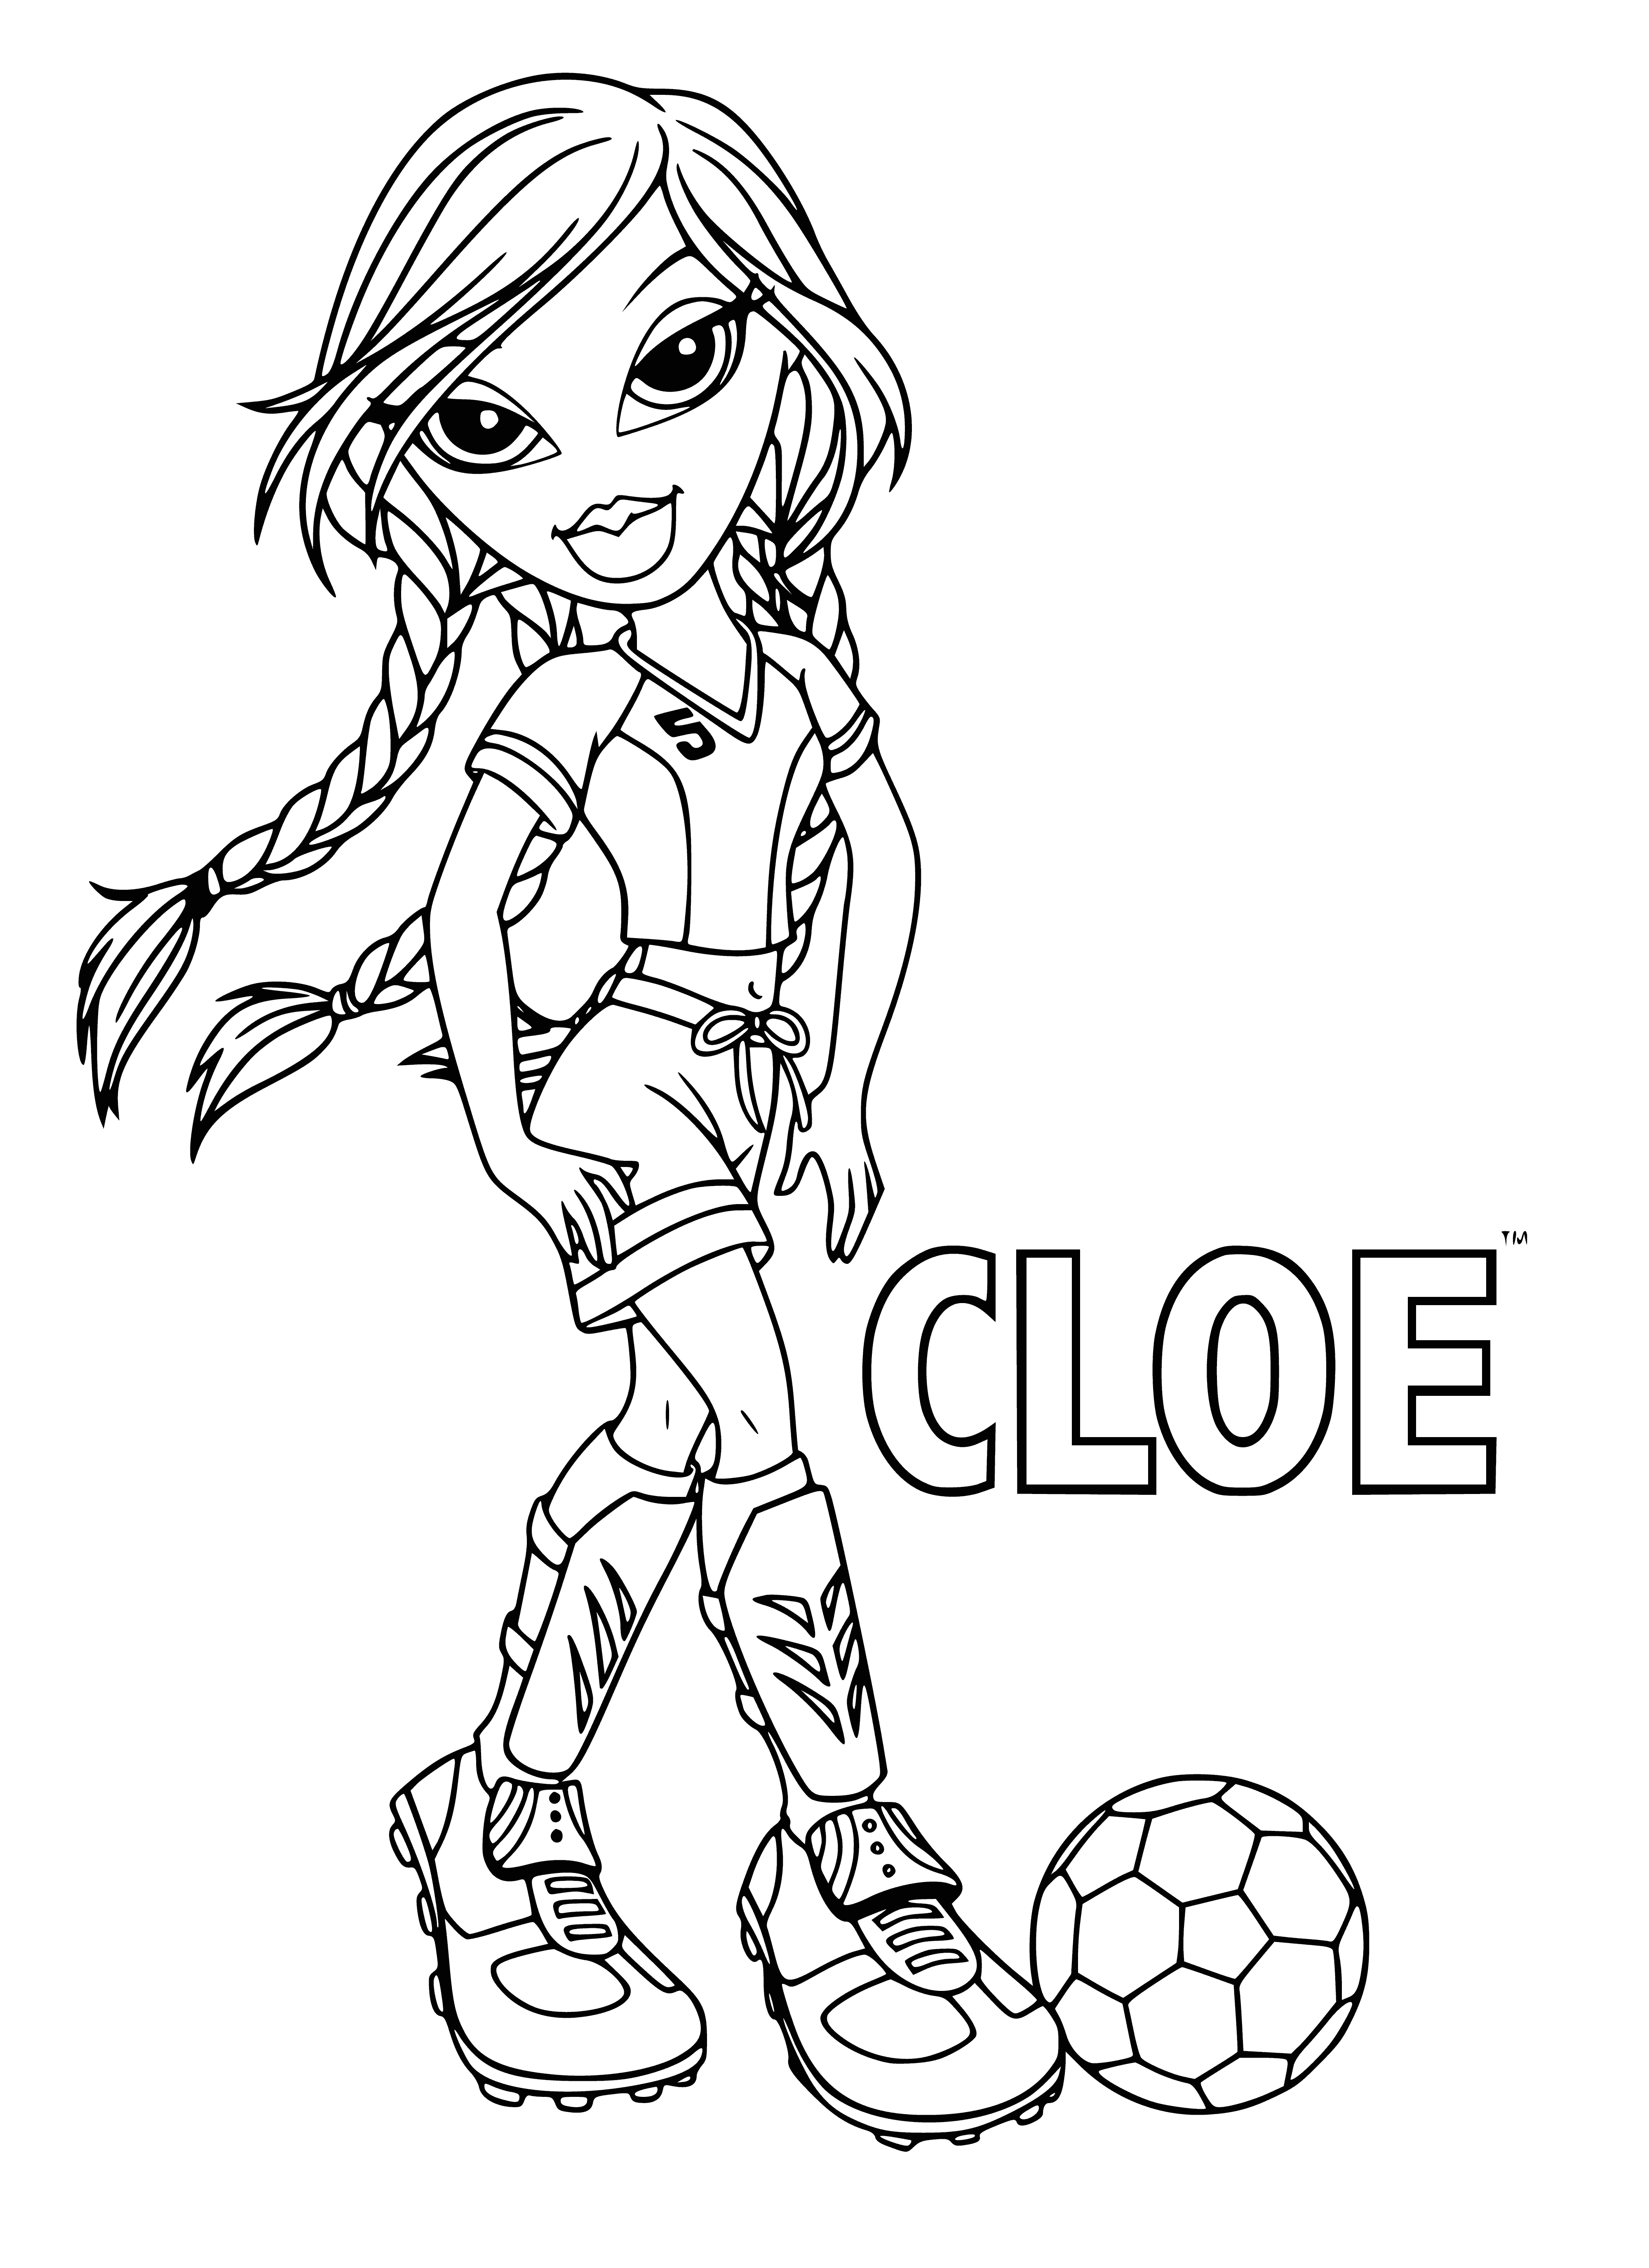 coloring page: Cloe sports a pink crop top, black shorts, pink & black sneakers, ponytail, & holds a water bottle & tennis racket.